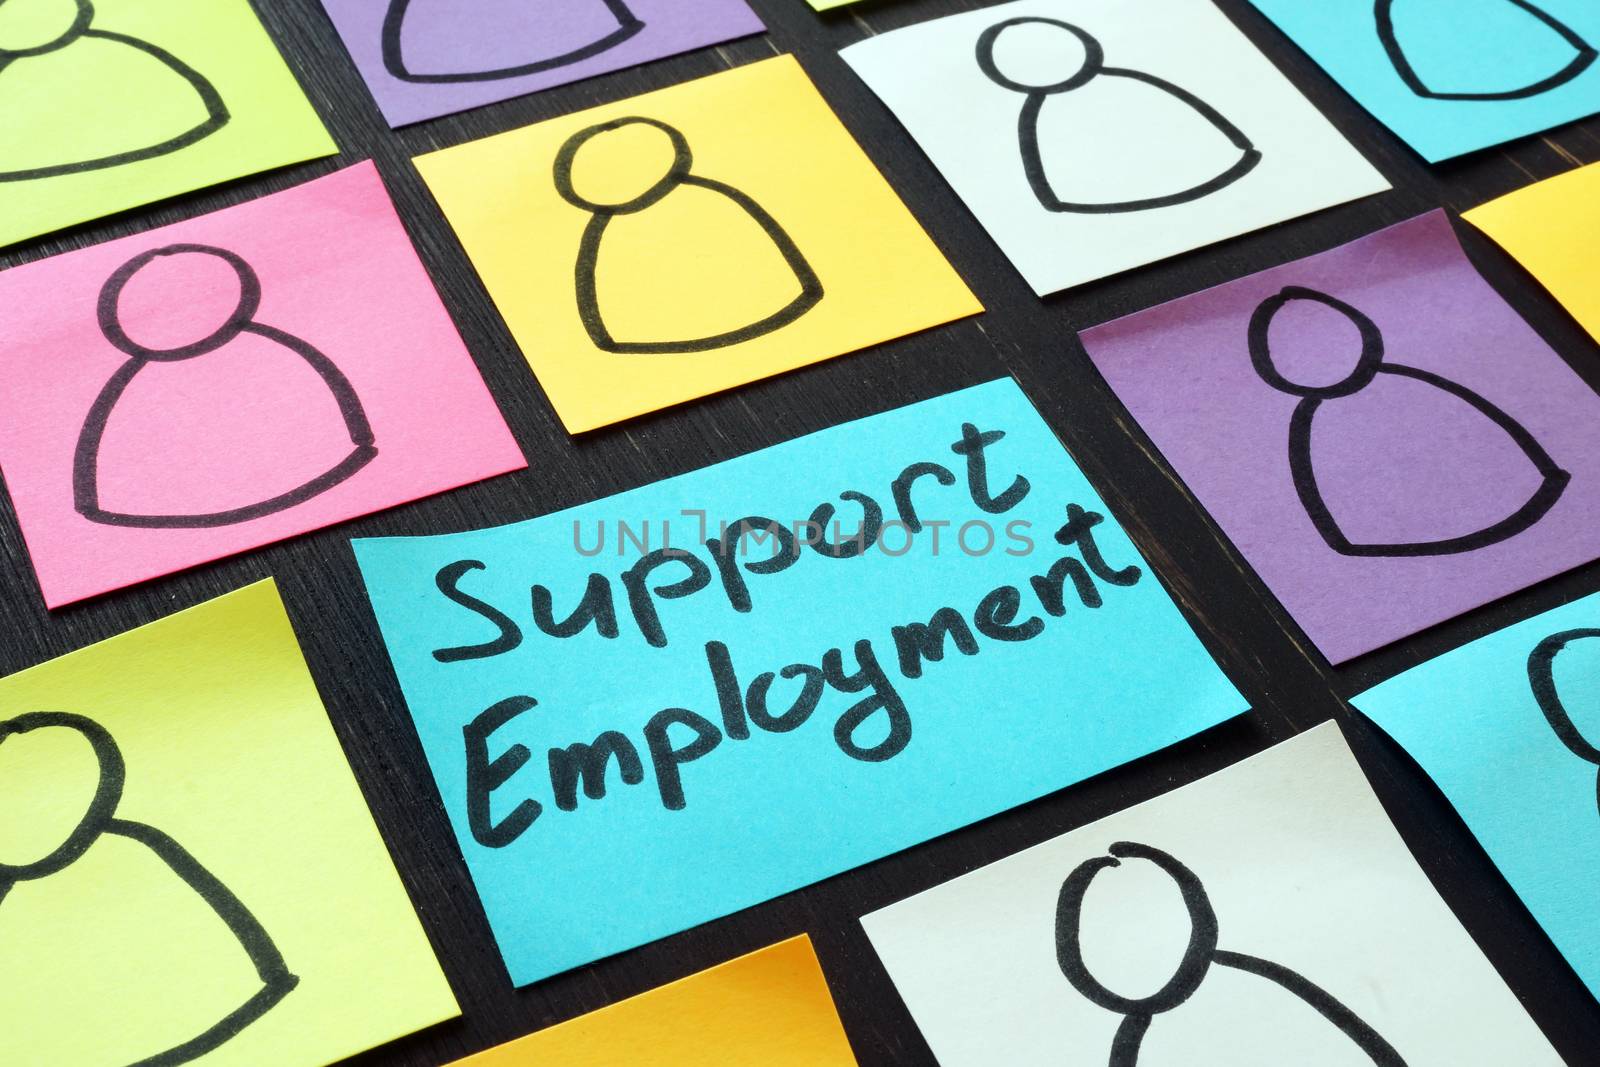 Support employment inscription and pieces of paper.